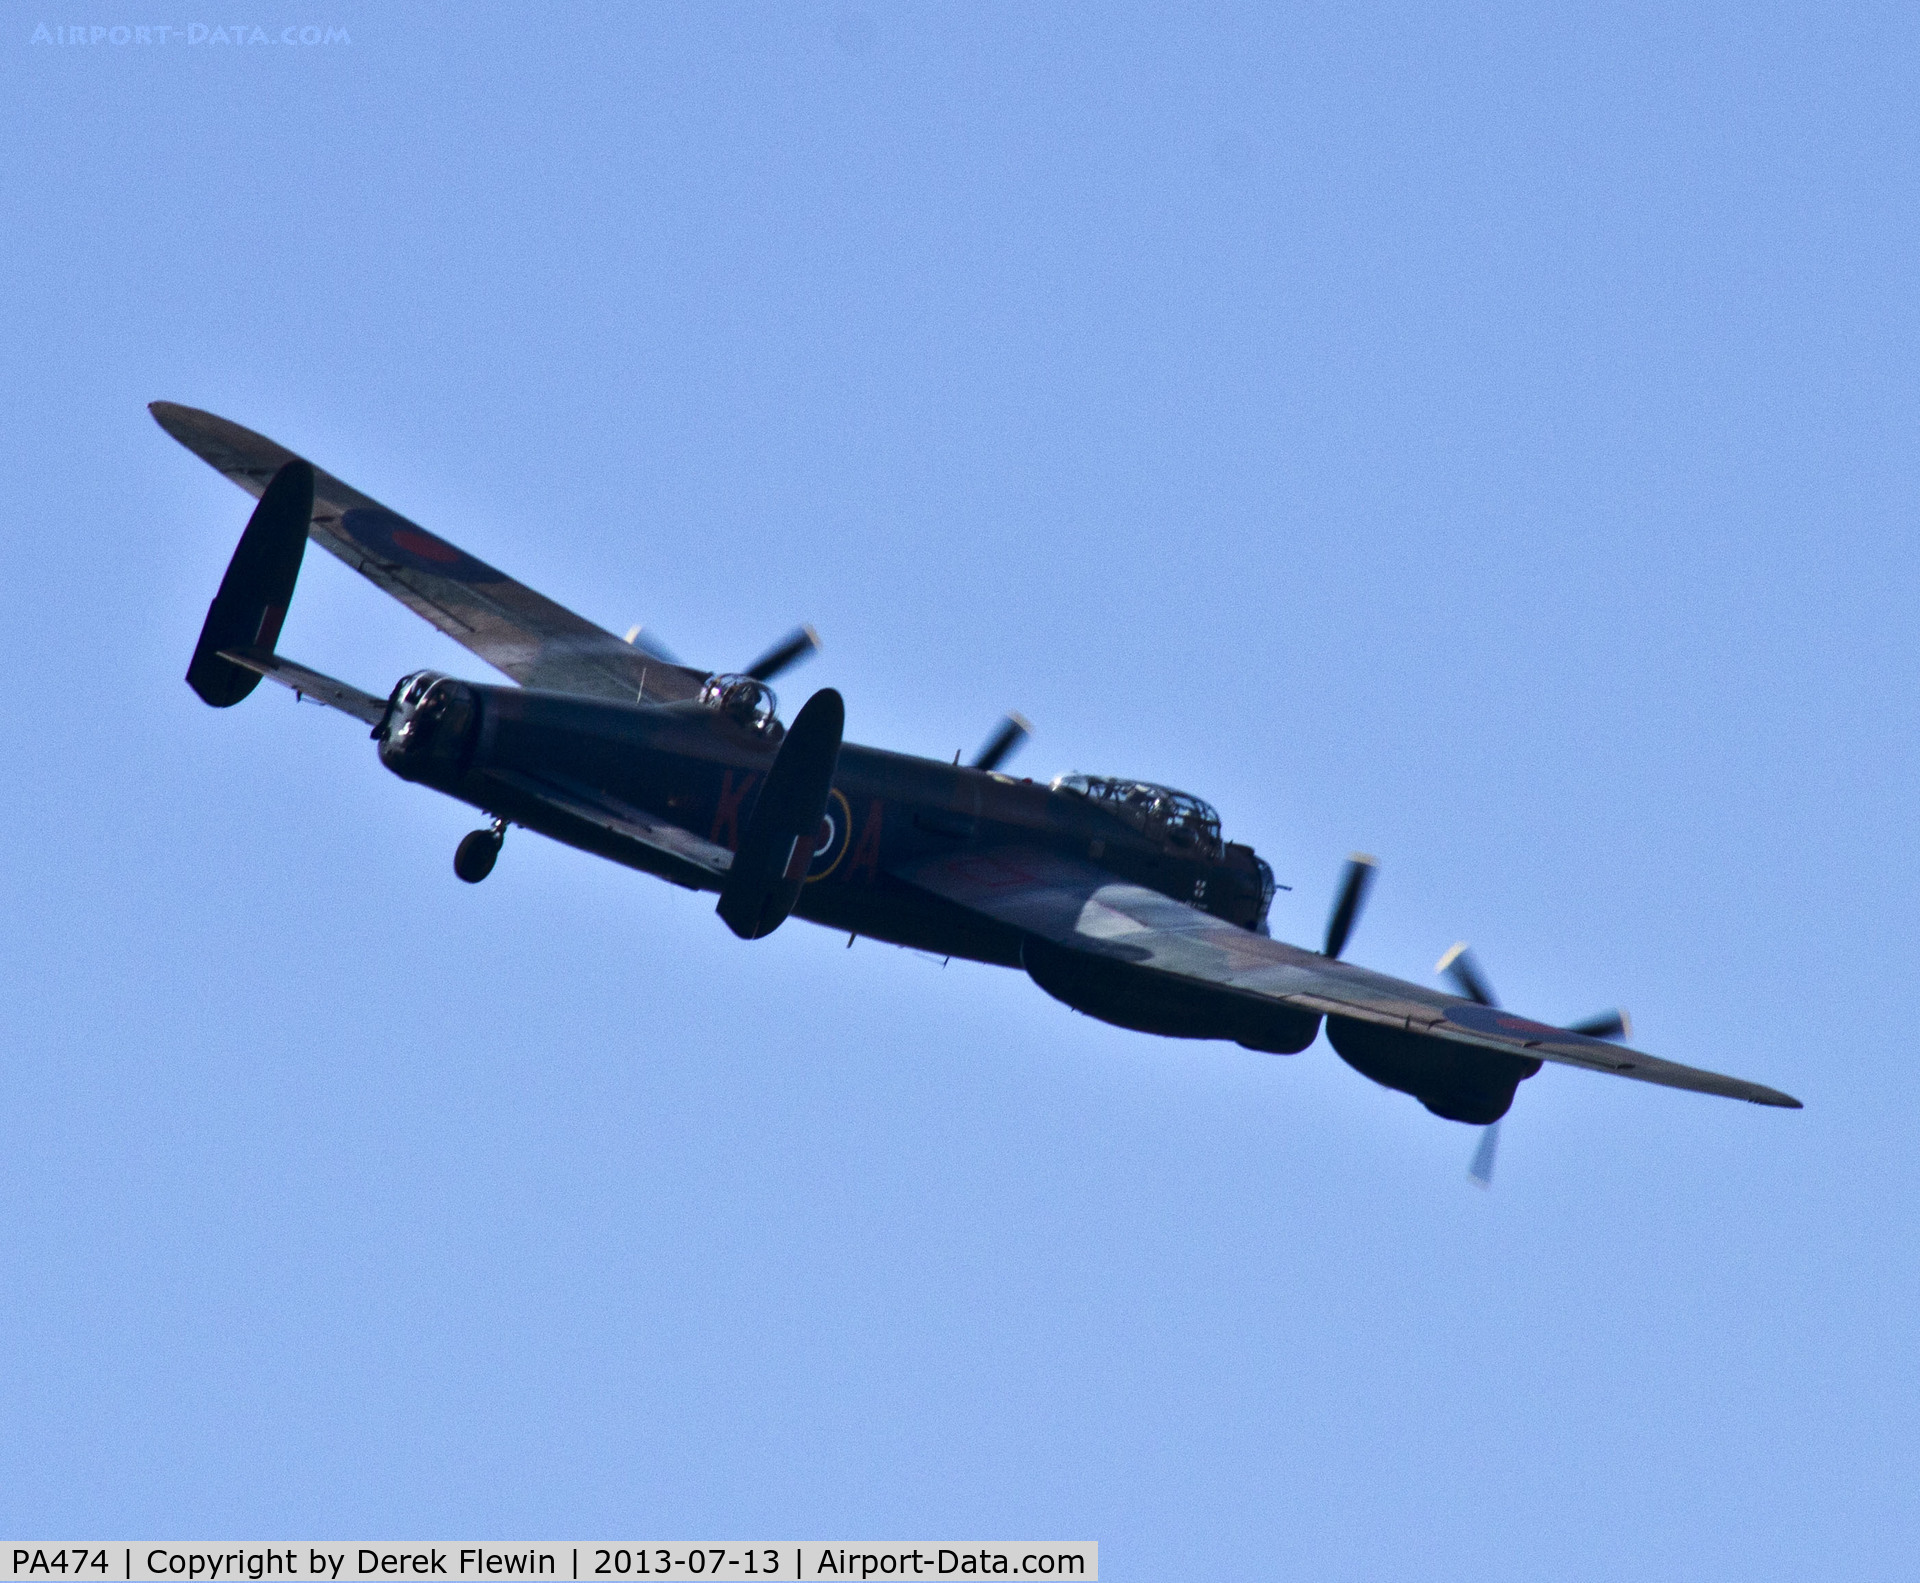 PA474, 1945 Avro 683 Lancaster B1 C/N VACH0052/D2973, BoBMF Lancaster B1 flying past our house whilst doing at isplay at the Wales National Airshow Swansea, Flight Crew for the day were, Capt: F/L Tim (Twigs) Dunlop / Co-Pilot: Fl Lt Loz Rushmere / Nav:Sqn Ldr Russ Russell / Air Eng: Flt Sgt Archie Moffatt.